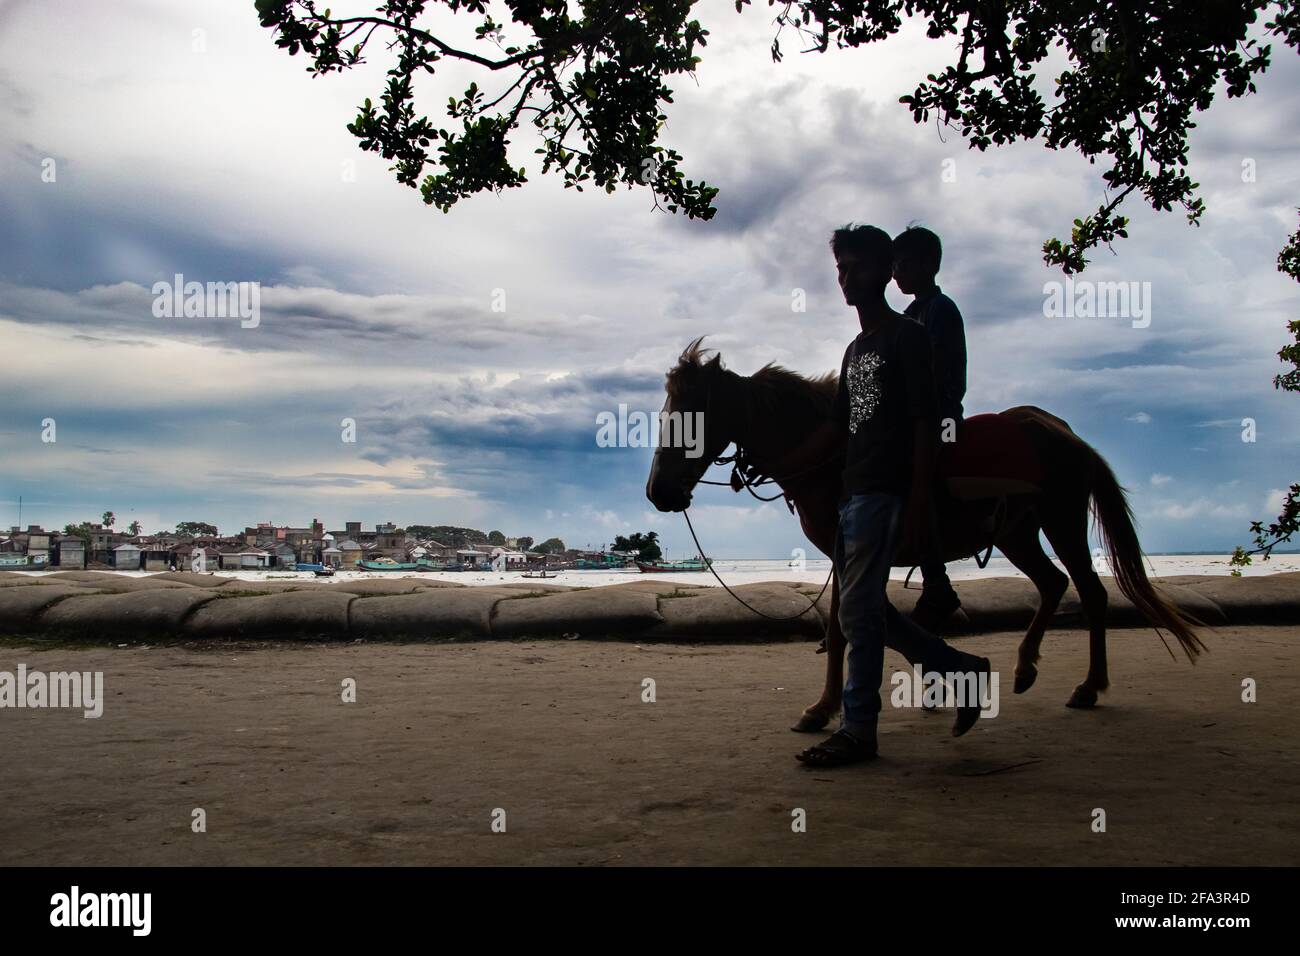 Horseman moving with tourist besides the riverbank I captured this image on 15th September 2020 from Chandpur, Bangladesh, South Asia Stock Photo